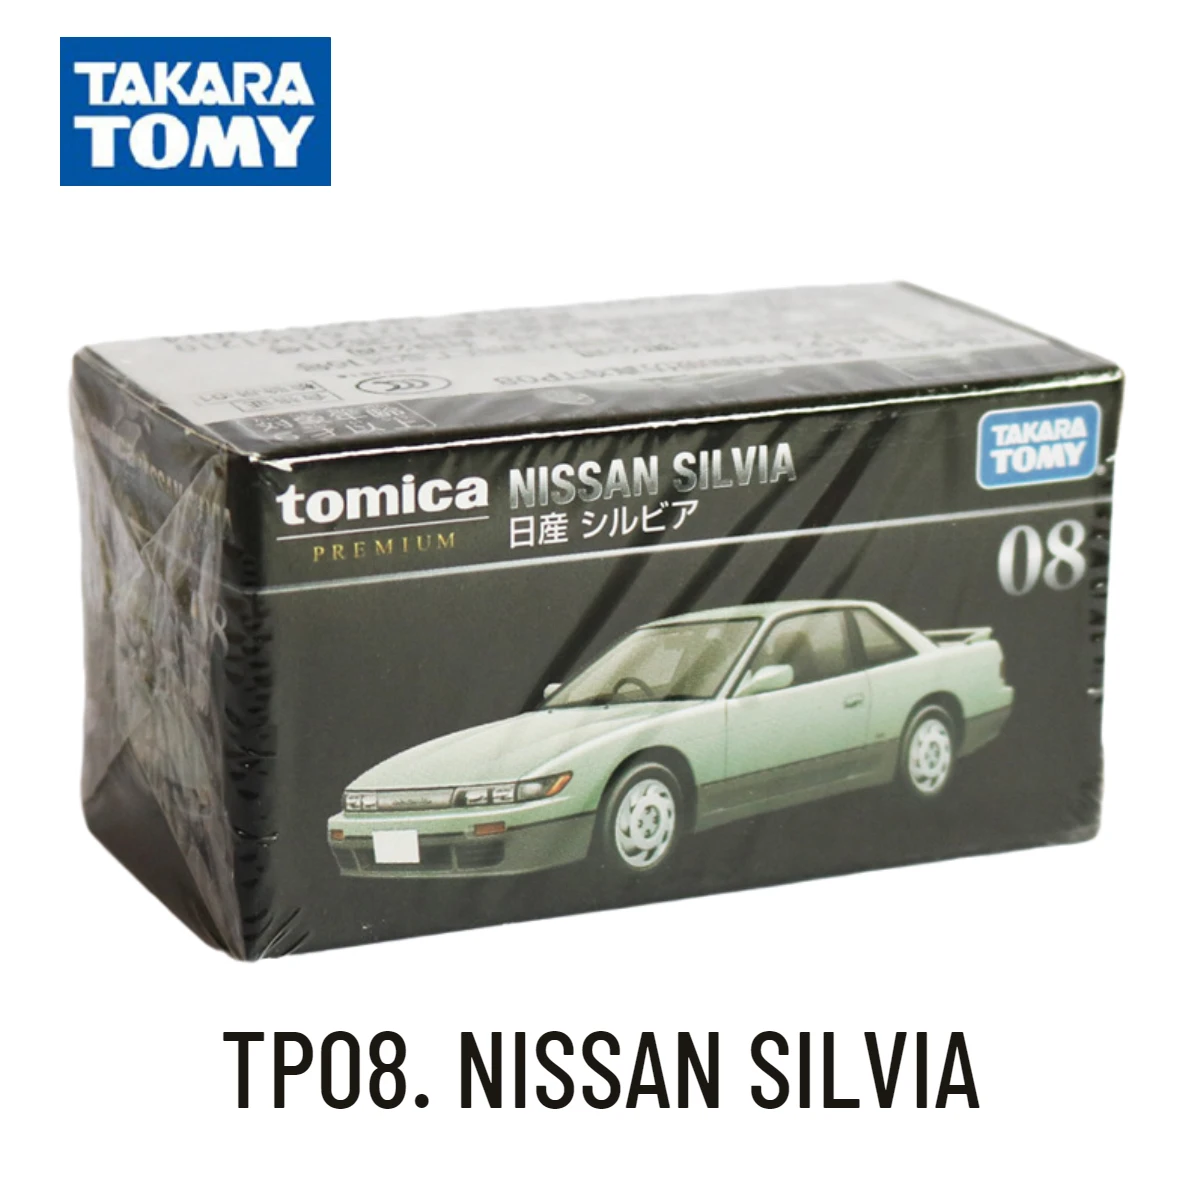 Takara Tomy Tomica Premium TP Scale Car Model NISSAN SILVIA Kids Room Decor Halloween Xmas Gift Toys for Baby Boys Girls 1 24 scale welly nissan silvia s15 spec s the mona lisa sport service rs car diecasts